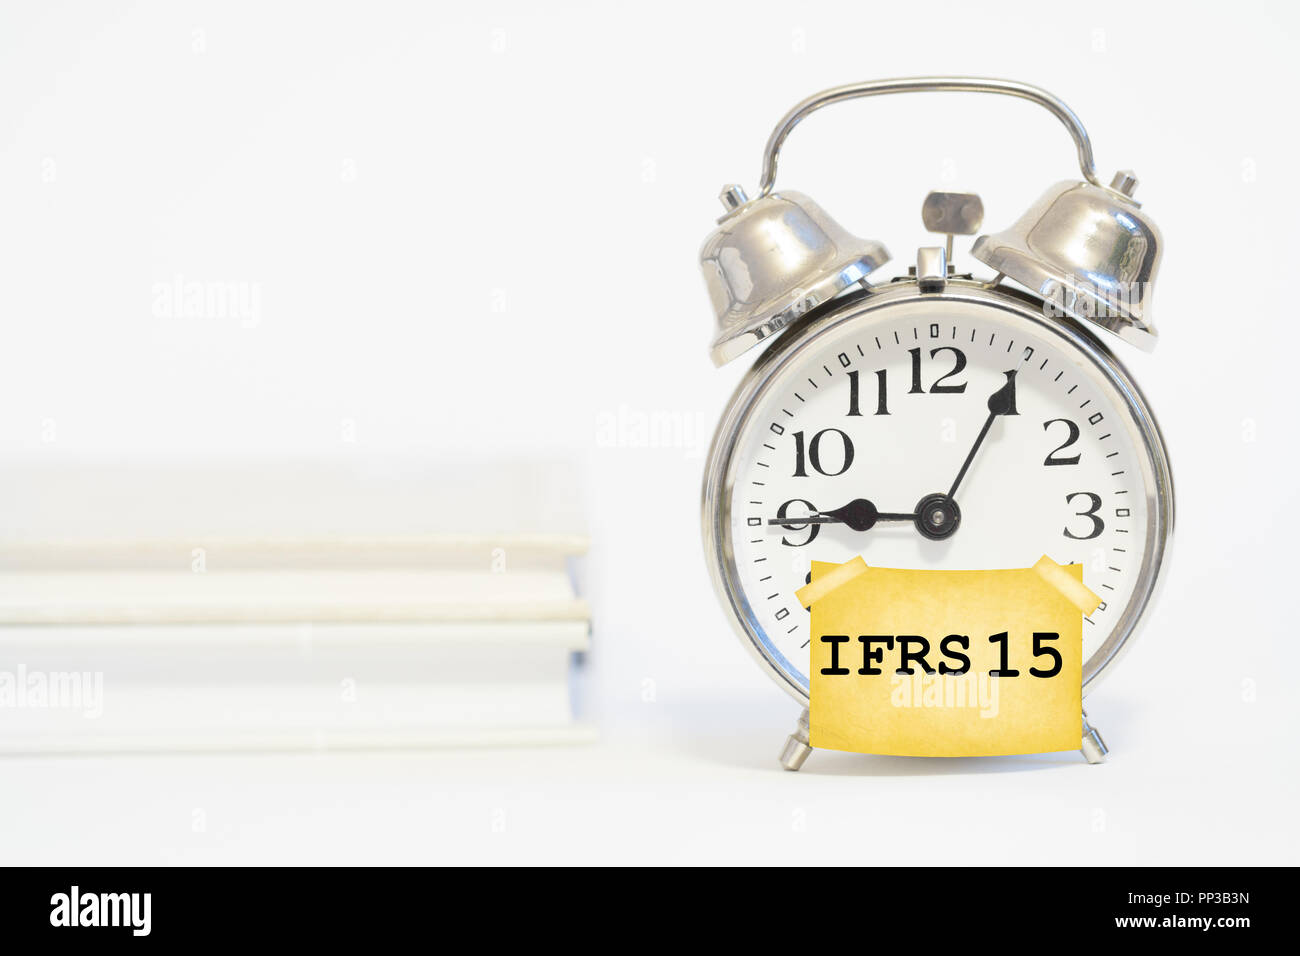 ifrs 15 revenue recognition Stock Photo